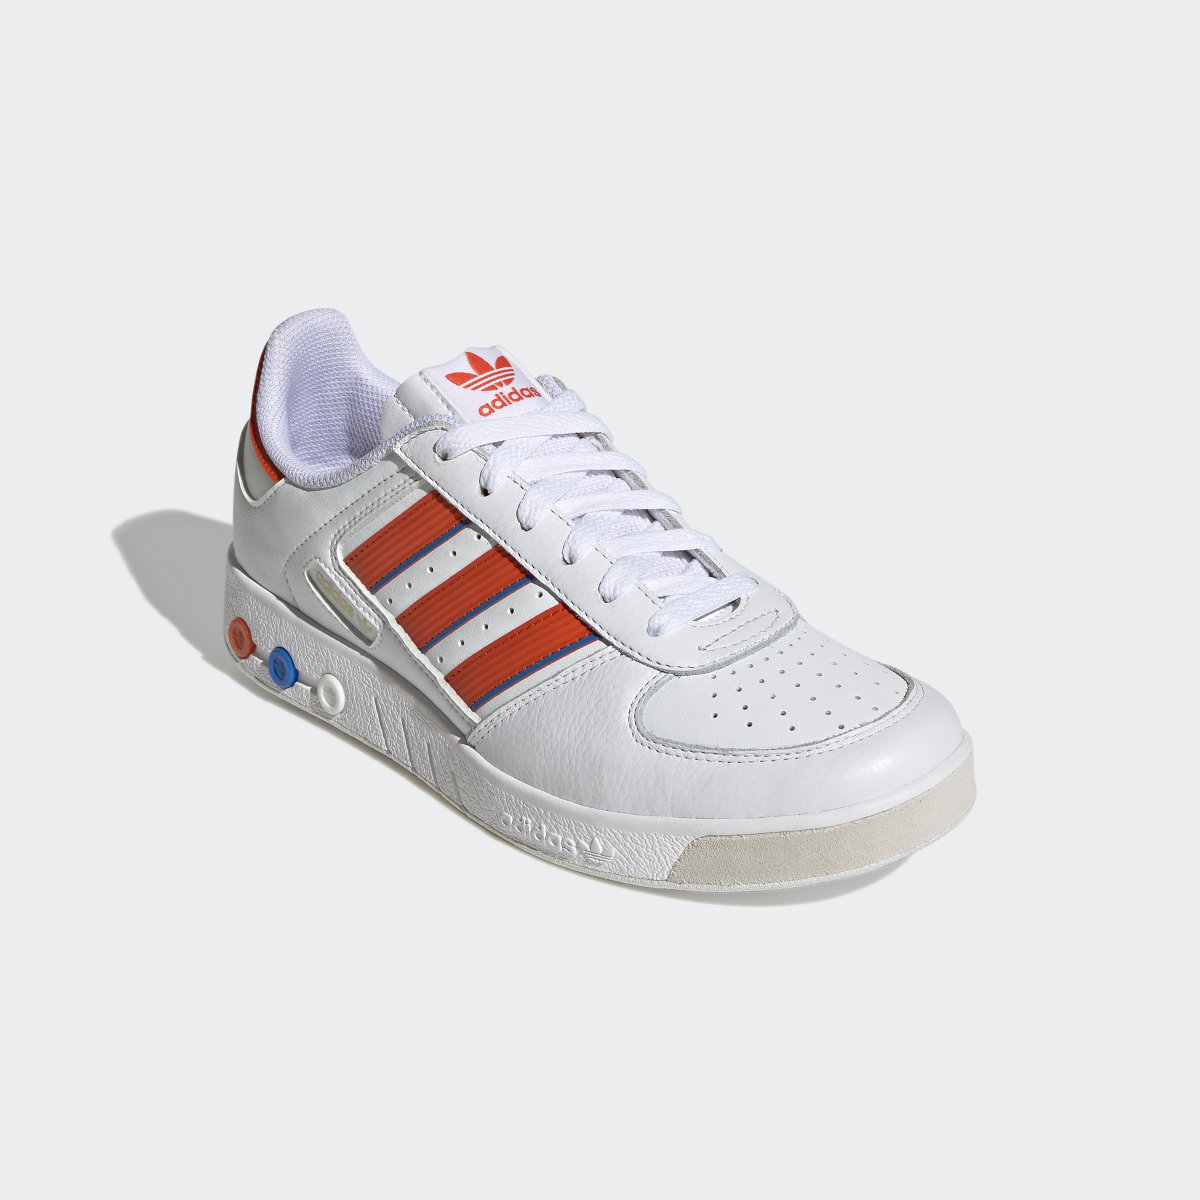 Adidas G.S. Court Shoes. 5